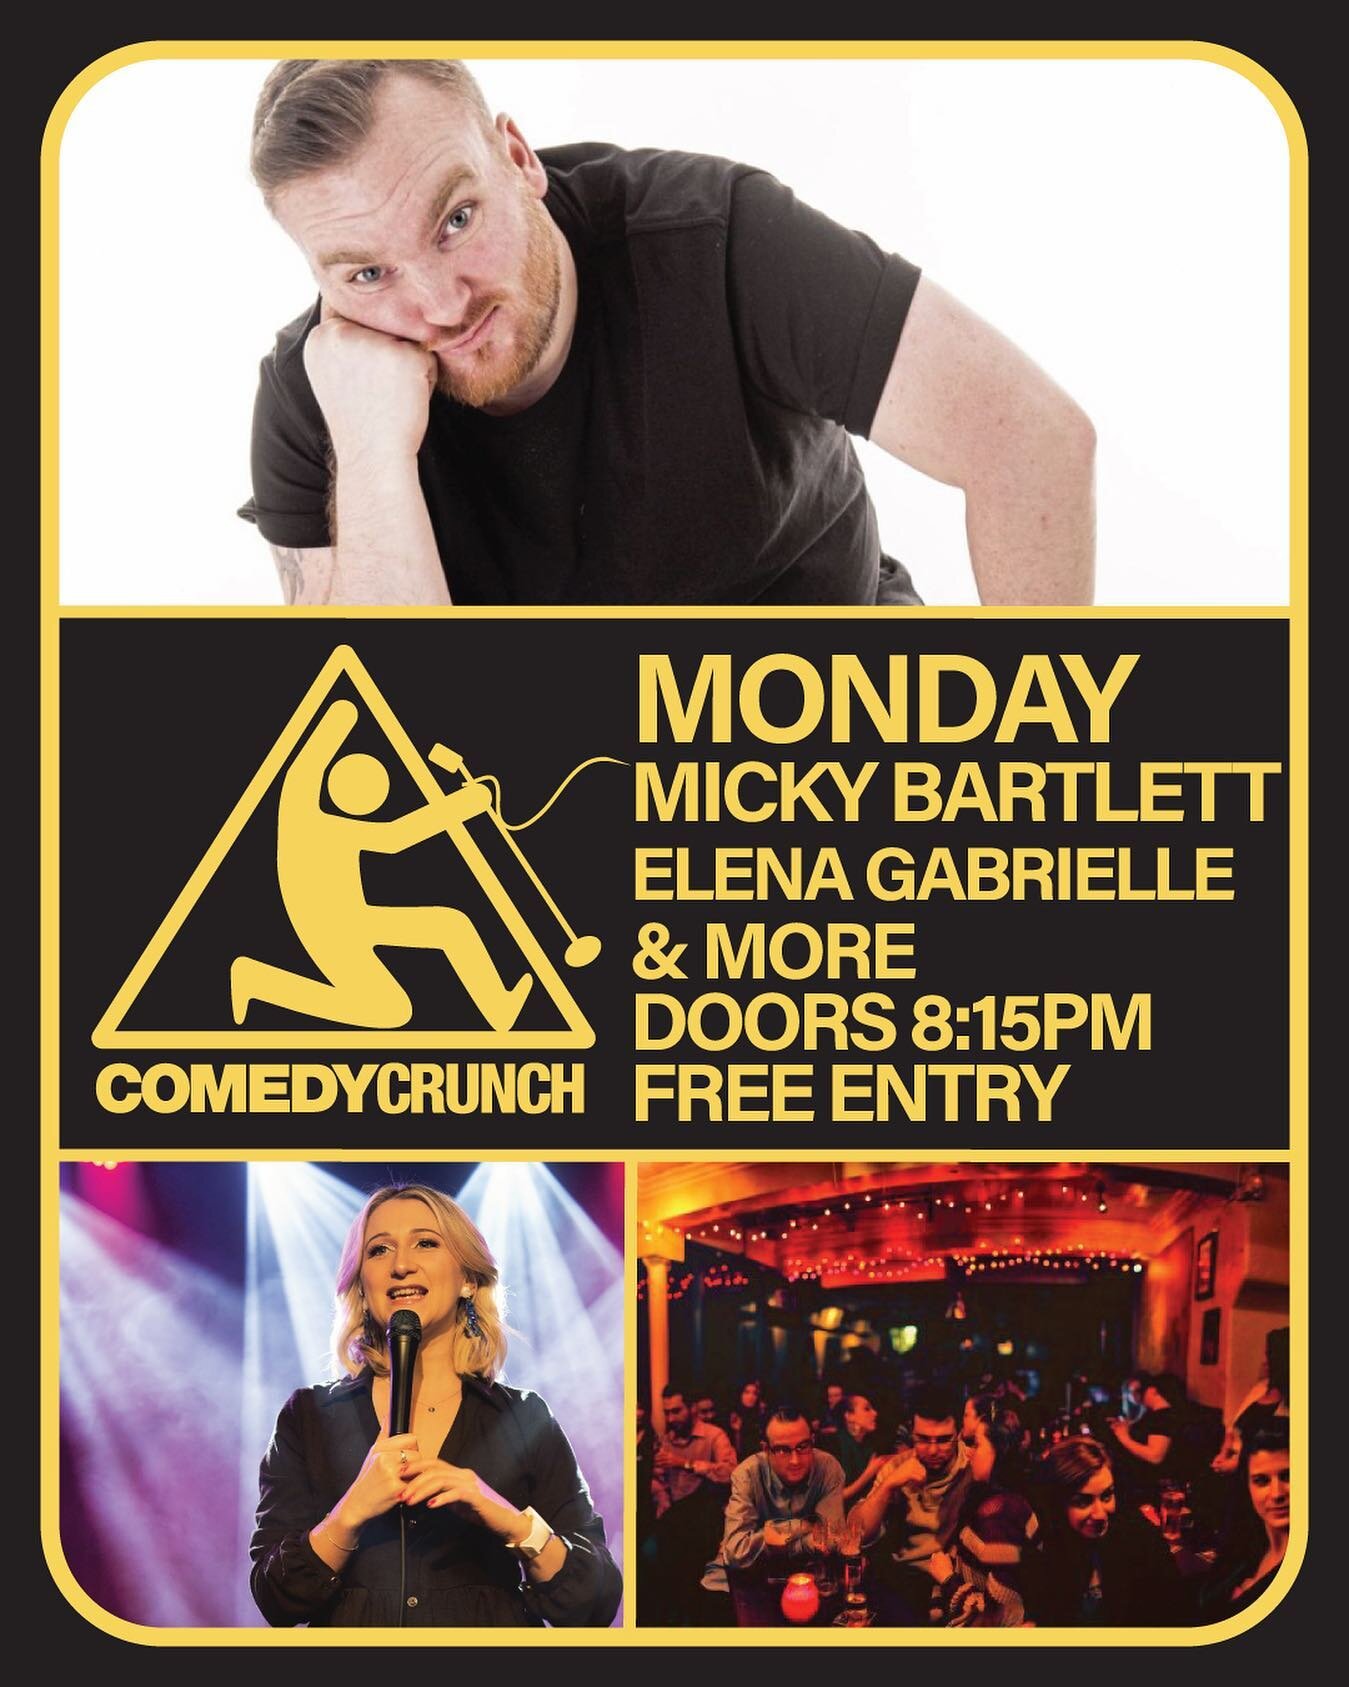 We&rsquo;re back Dublin with a powerhouse double-header Monday with Belfast&rsquo;s Micky Bartlett &amp; Australias Elena Gabrielle! Doors 8:15pm/show 9pm🎙✨ Free ice-cream too! 
#bestclubintown 
#dublinevents
#mondaymotivation 
#goodtimes
#dannyobri